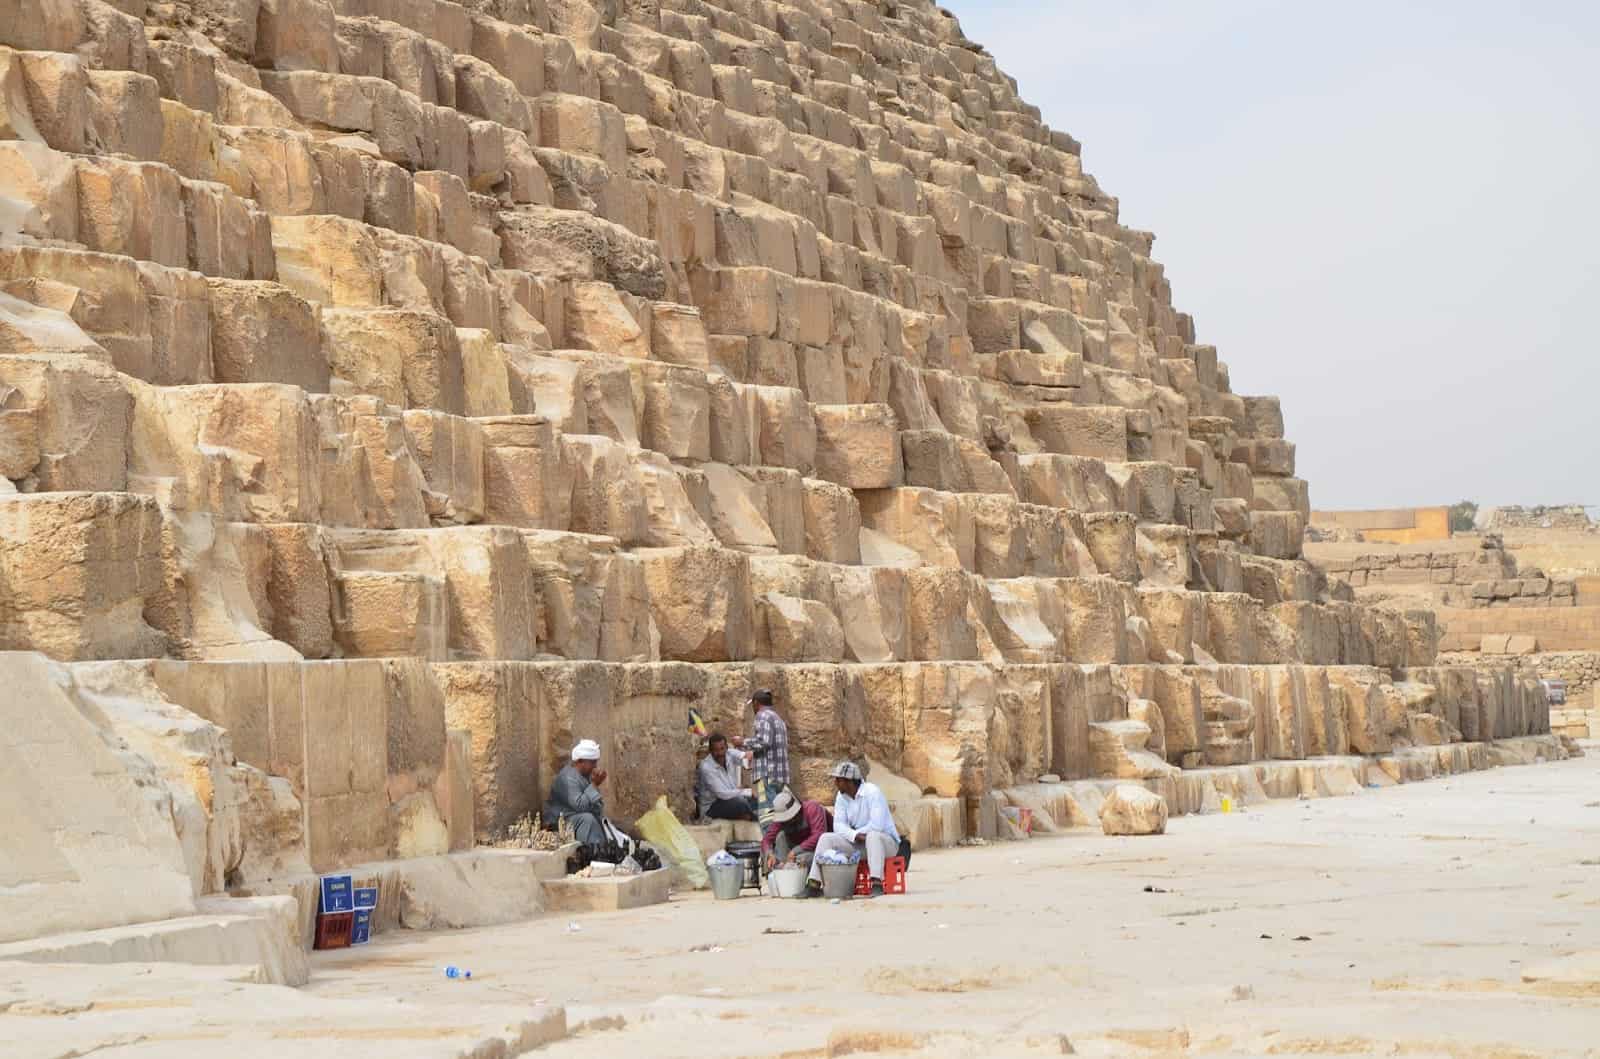 Vendors resting at the Pyramid of Khufu at the Pyramids of Giza in Egypt